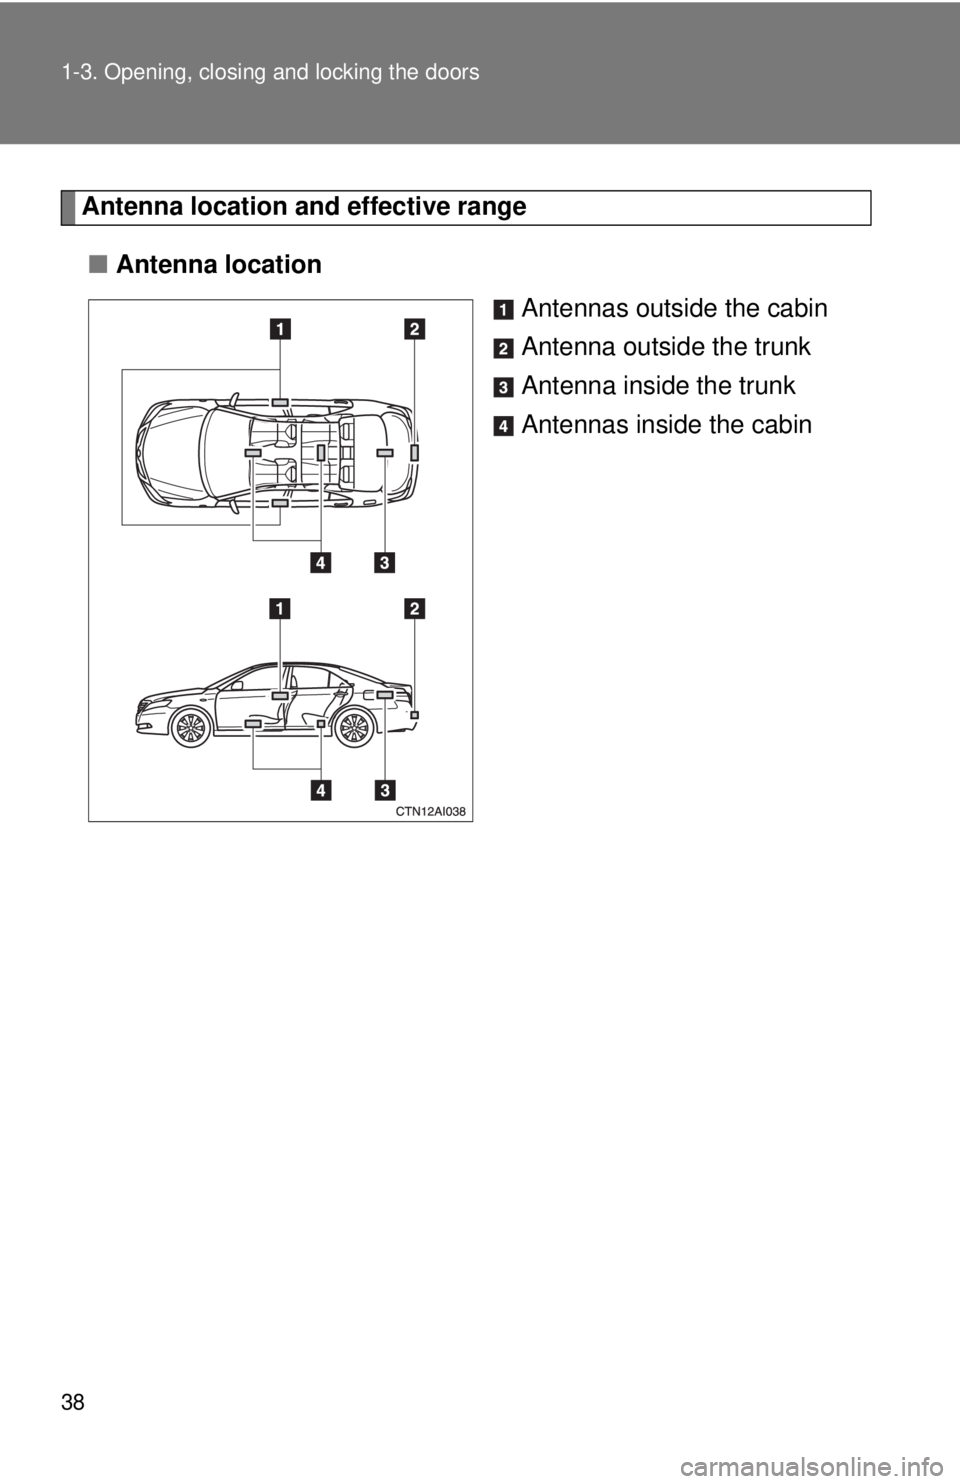 TOYOTA CAMRY HV 2009 Owners Guide 38 1-3. Opening, closing and locking the doors
Antenna location and effective range
■ Antenna location
Antennas outside the cabin
Antenna outside the trunk
Antenna inside the trunk
Antennas inside t